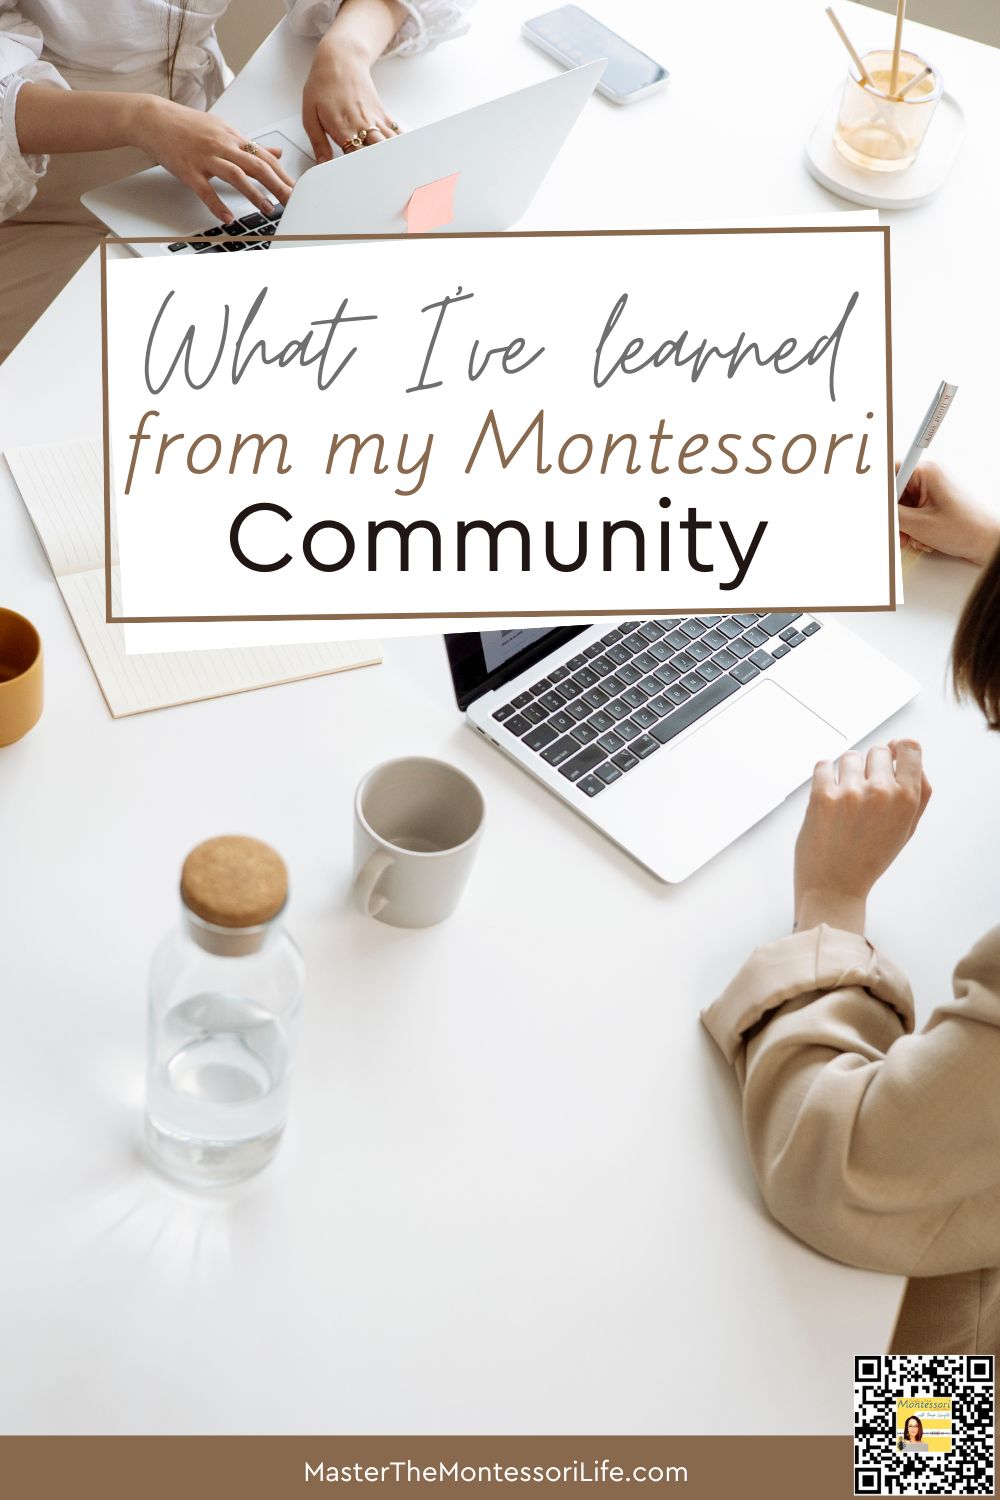 What I’ve learned from my Montessori community